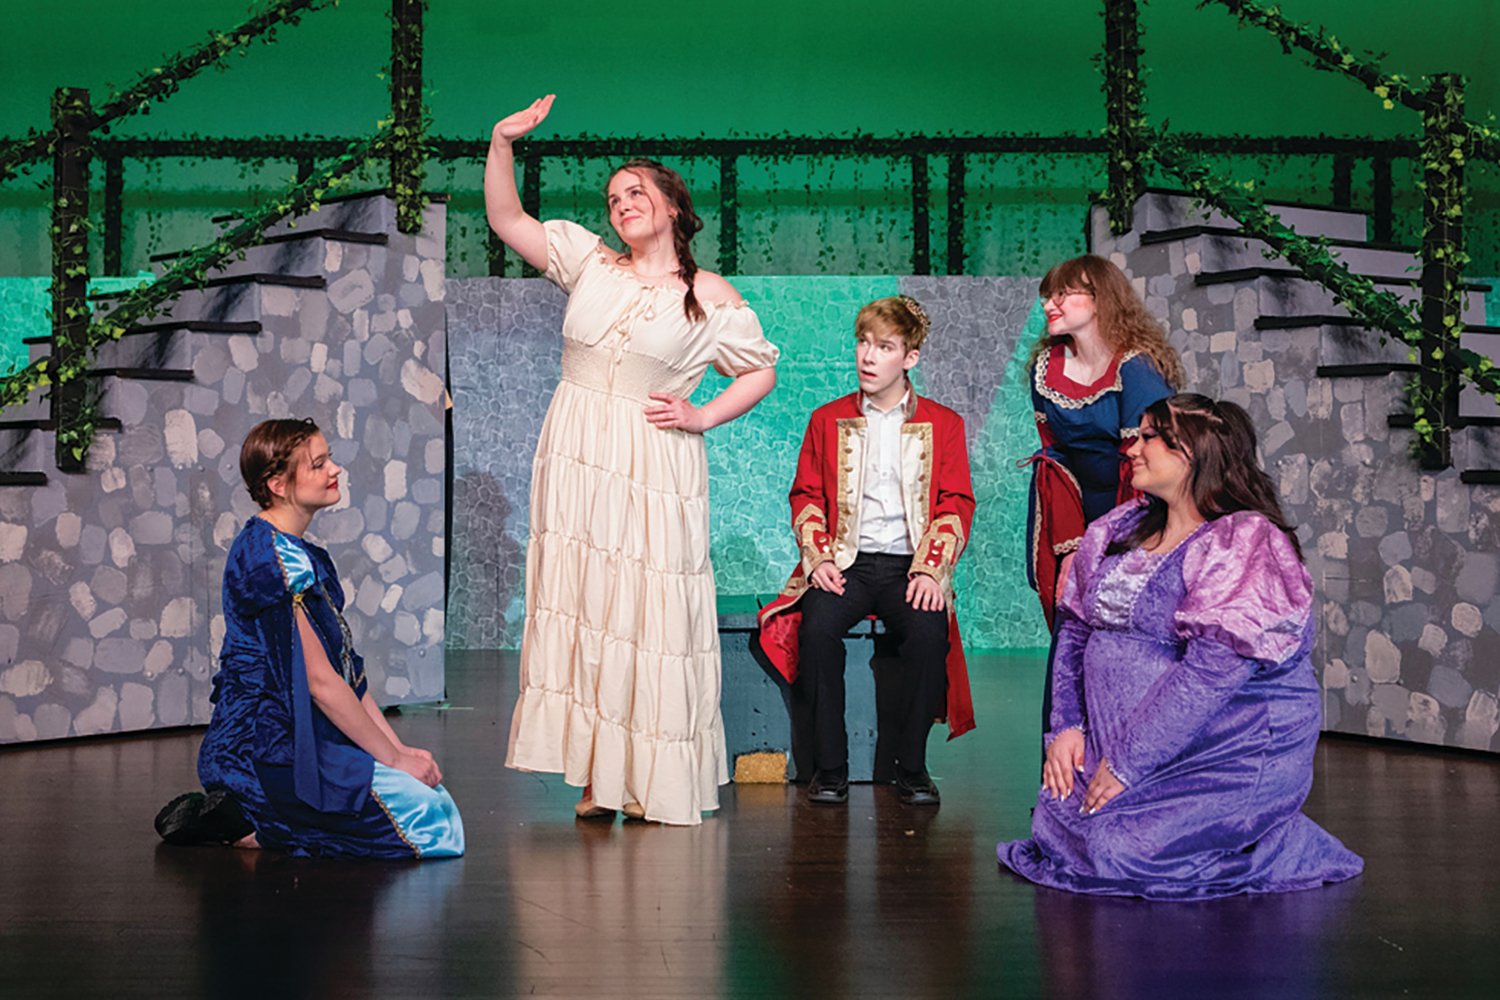 Emerson Boaz, who plays Winifred, left, and Rylan Dowell, who plays Prince Dauntless, center, rehearse a scene from Once Upon a Mattress with ladies in waiting, Aurora Murdock, Shelby Kamerer and Kennedy Isbell.